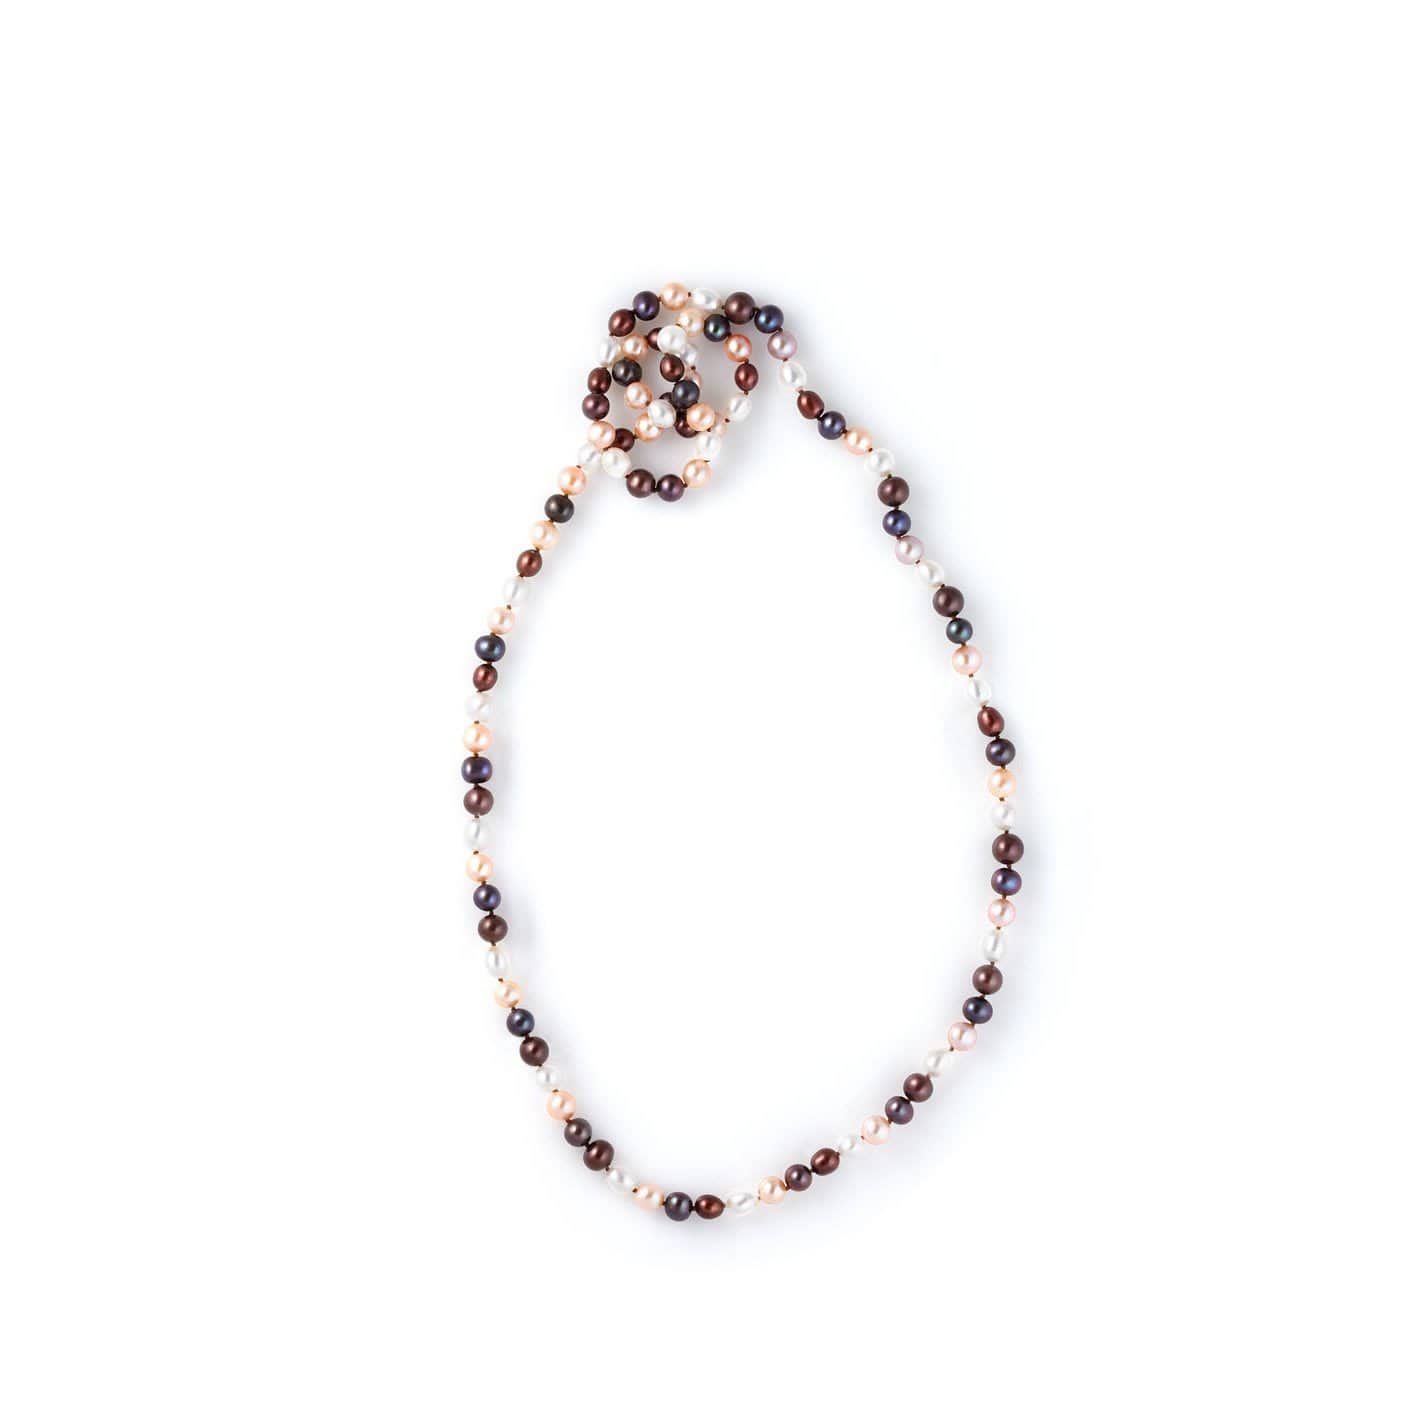 AIRE PEARL NECKLACE - MULTI-COLORED PEARL NECKLACE - Chris Aire Fine Jewelry & Timepieces